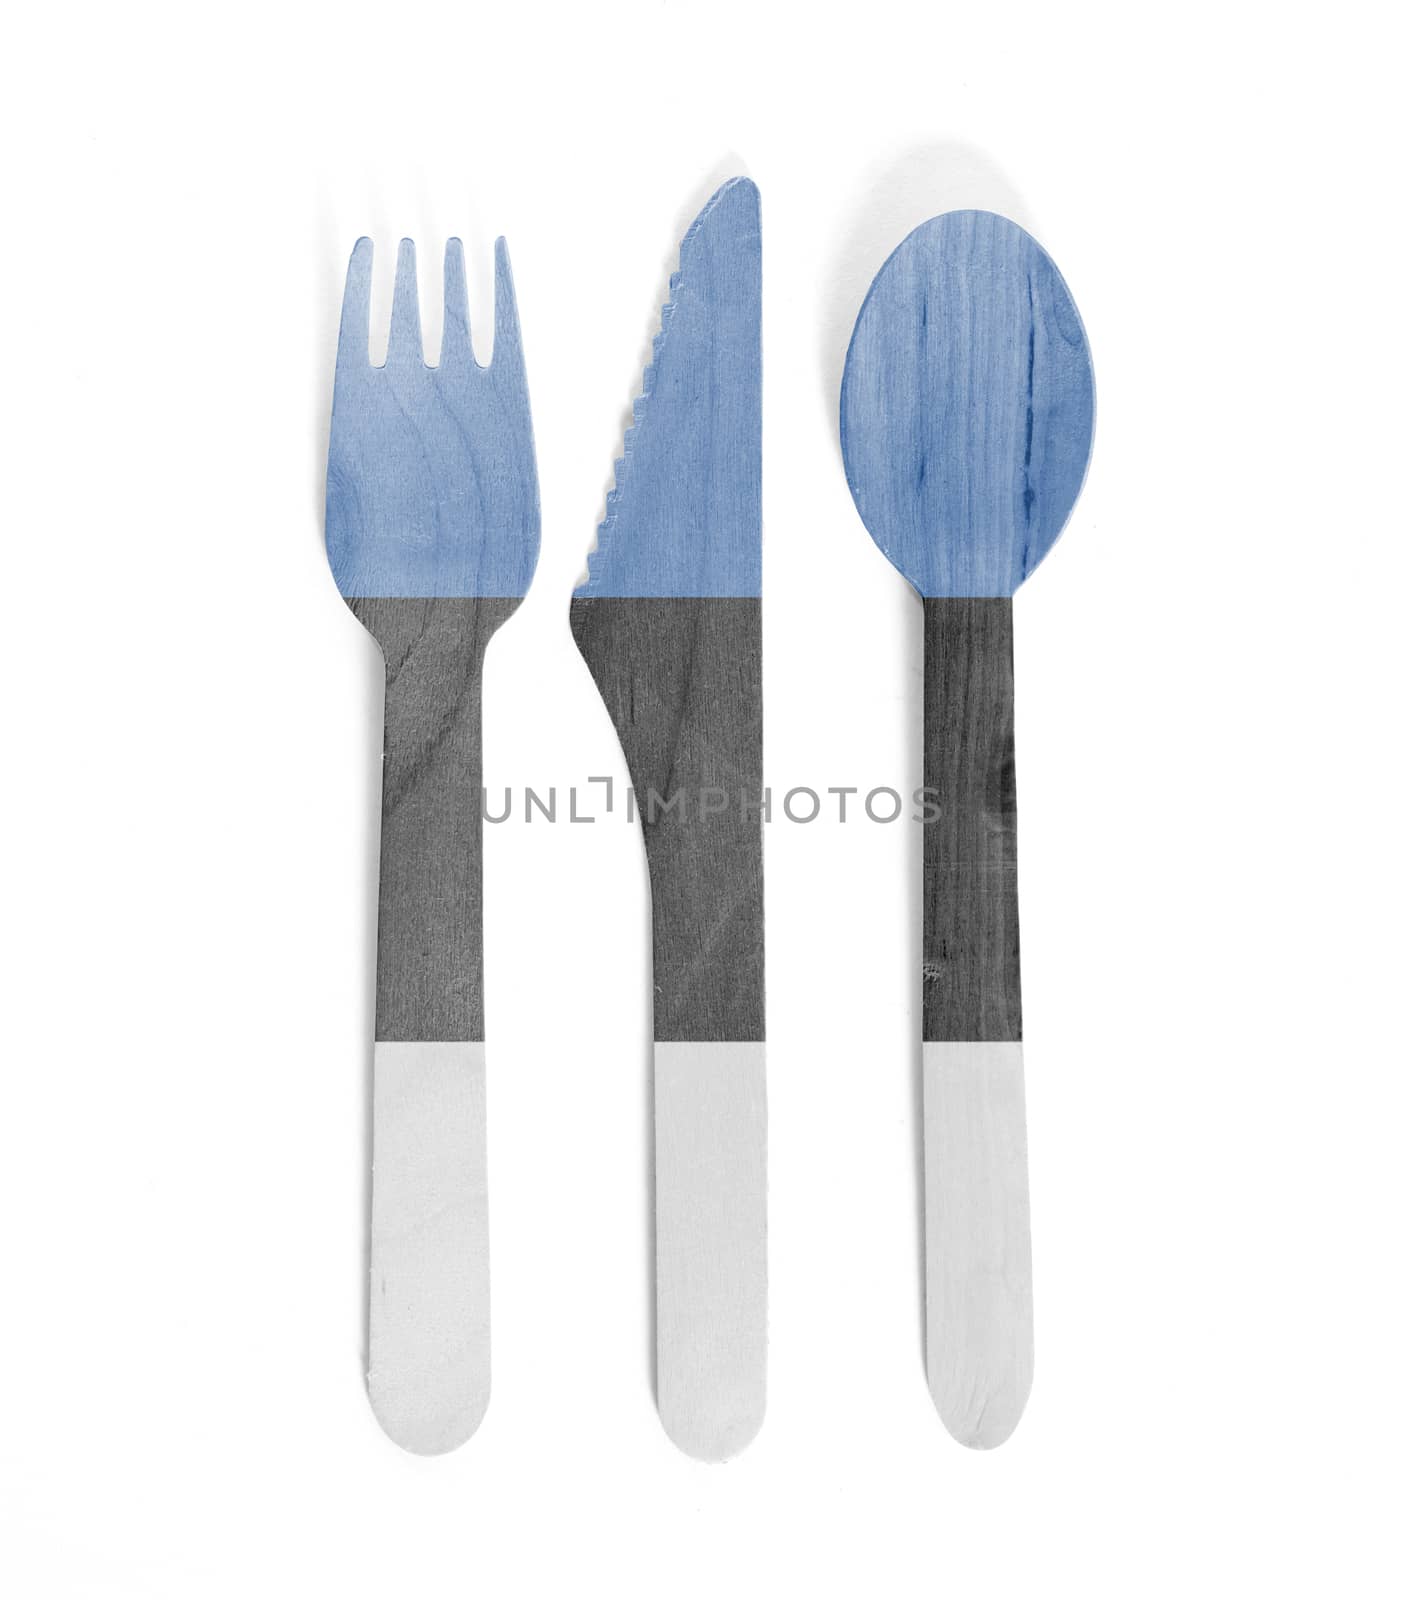 Eco friendly wooden cutlery - Plastic free concept - Flag of Est by michaklootwijk